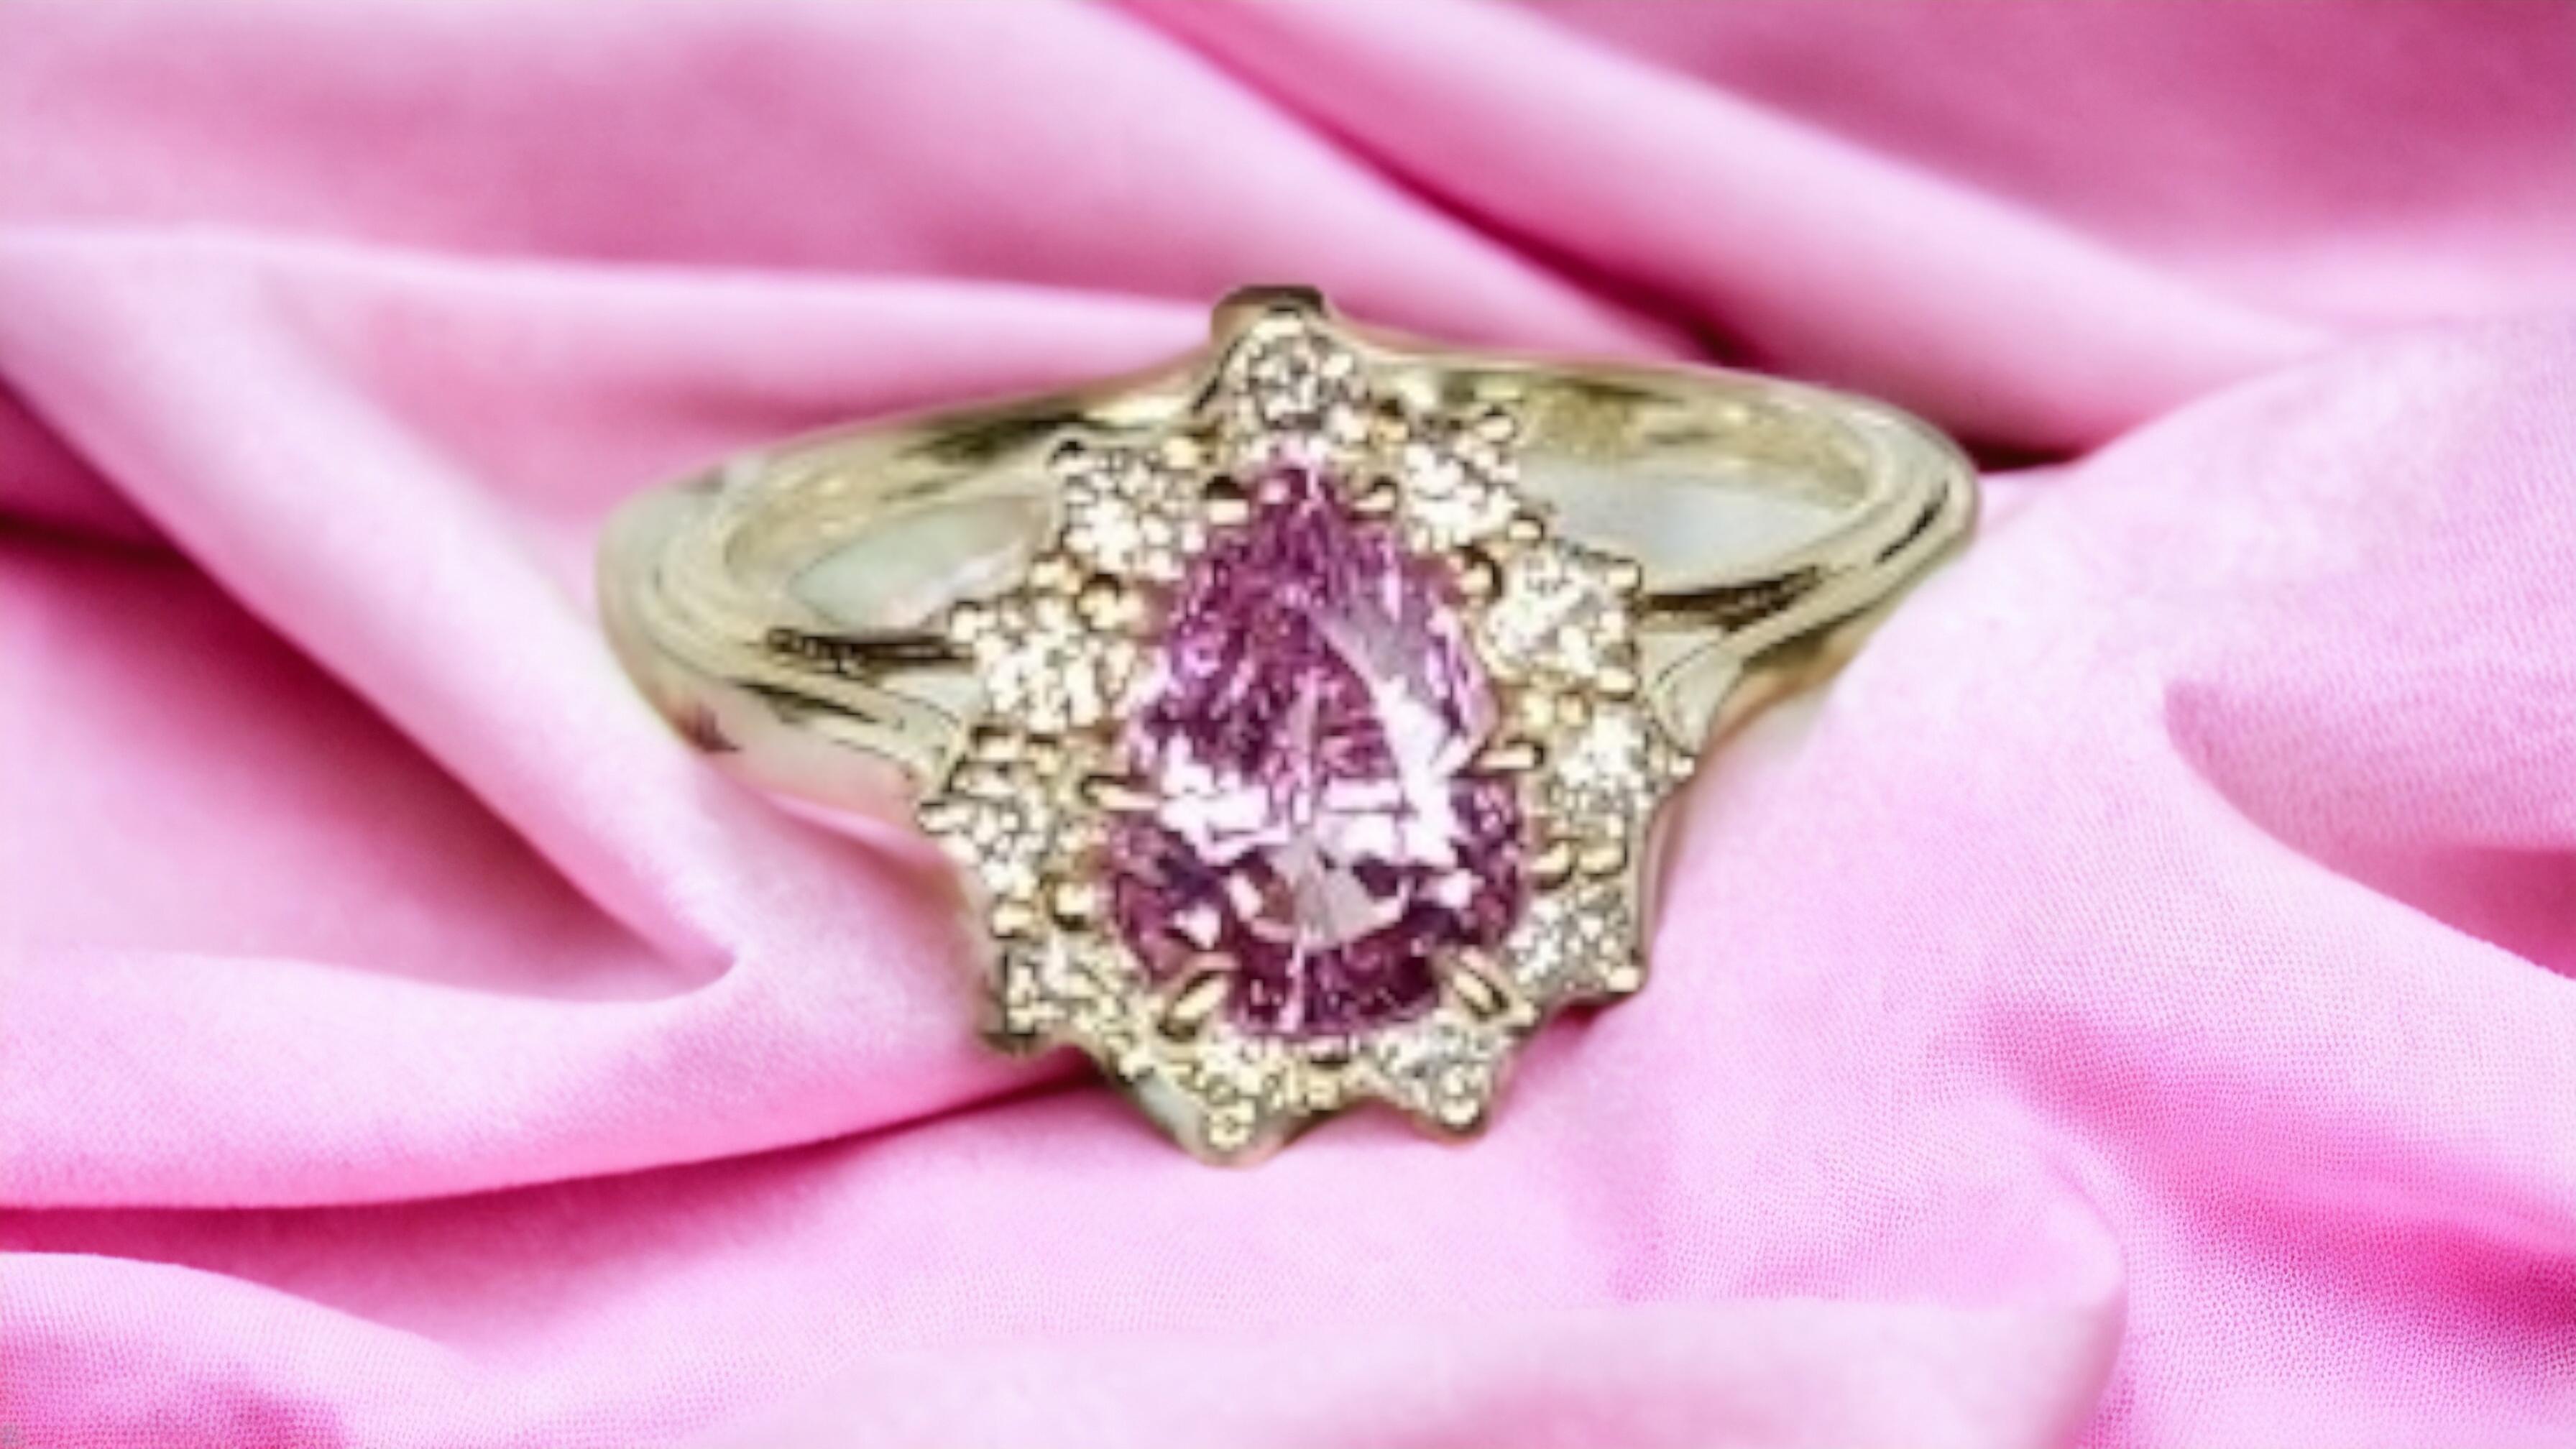 New Cert 1.37 ct Unheated Natural Pink Sapphire Diamond Ring in 14k Gold For Sale 4